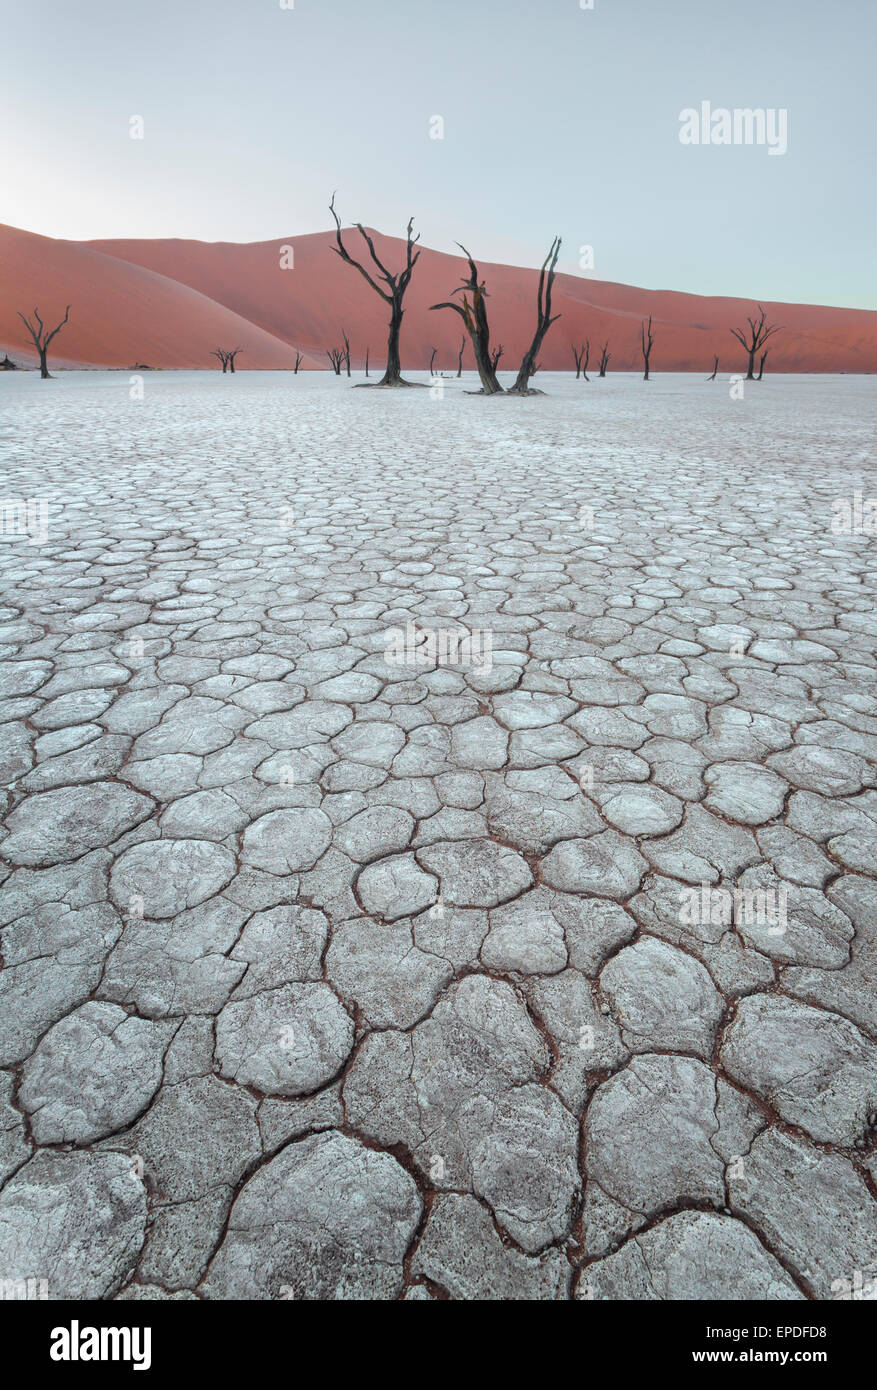 Early morning in Dead Vlei, a salt pan in Namibia. Stock Photo